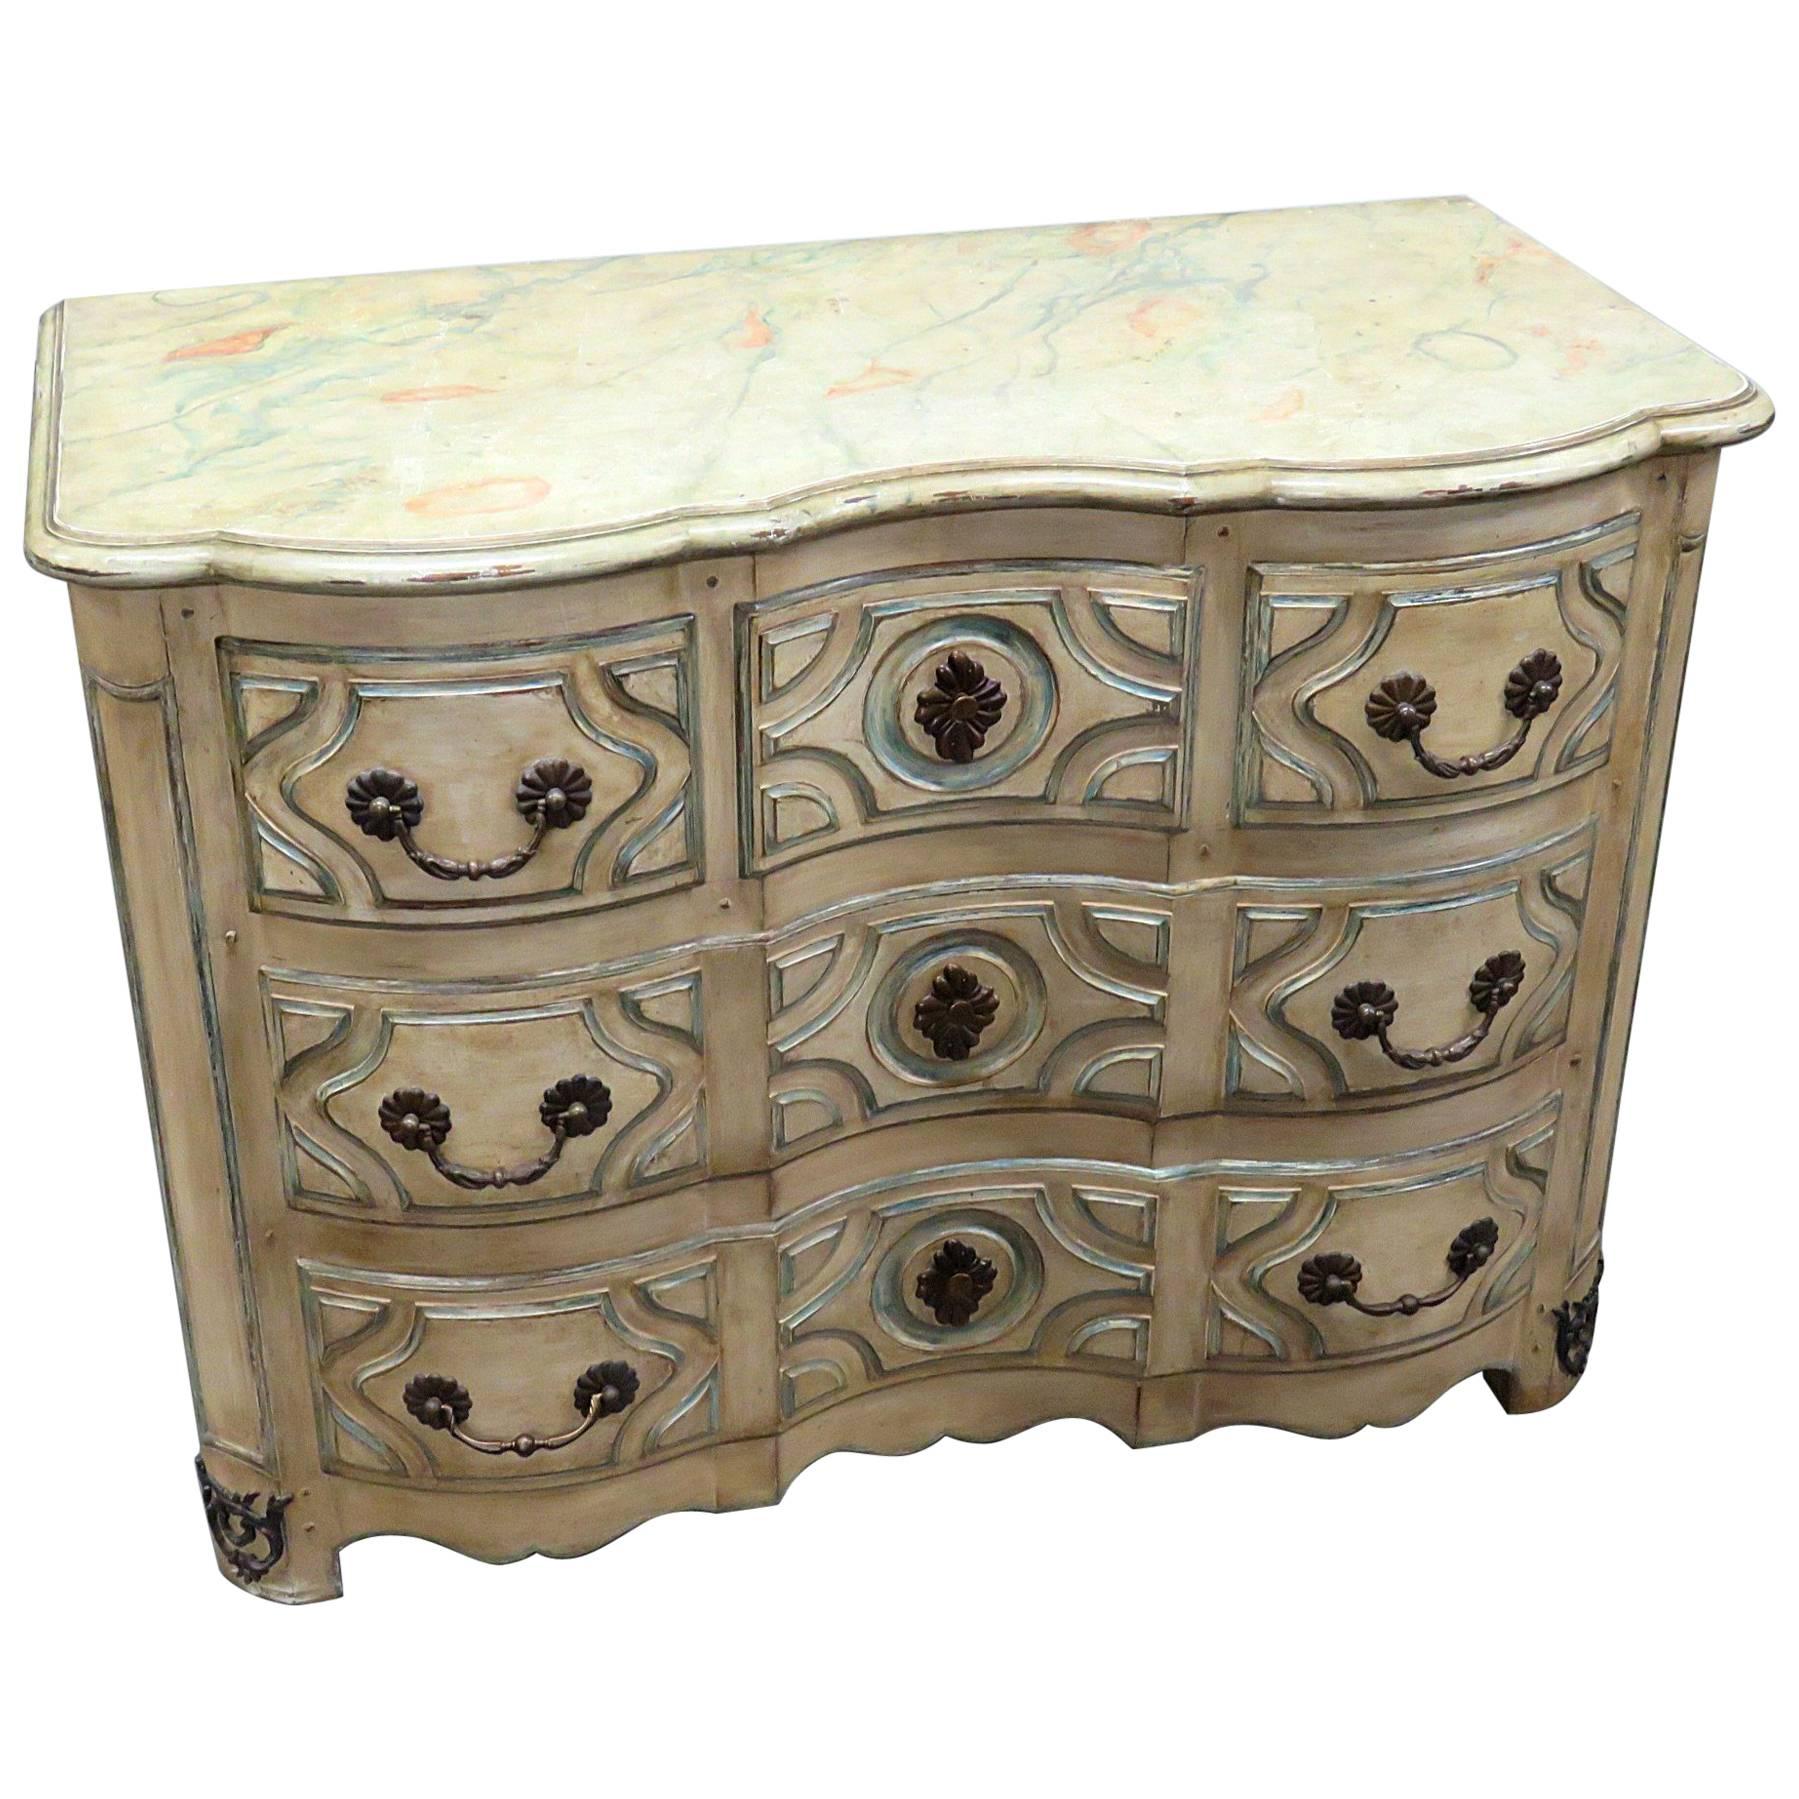 Maison Jansen Style Distressed Faux Marble Paint Decorated Foyer Chest Commode